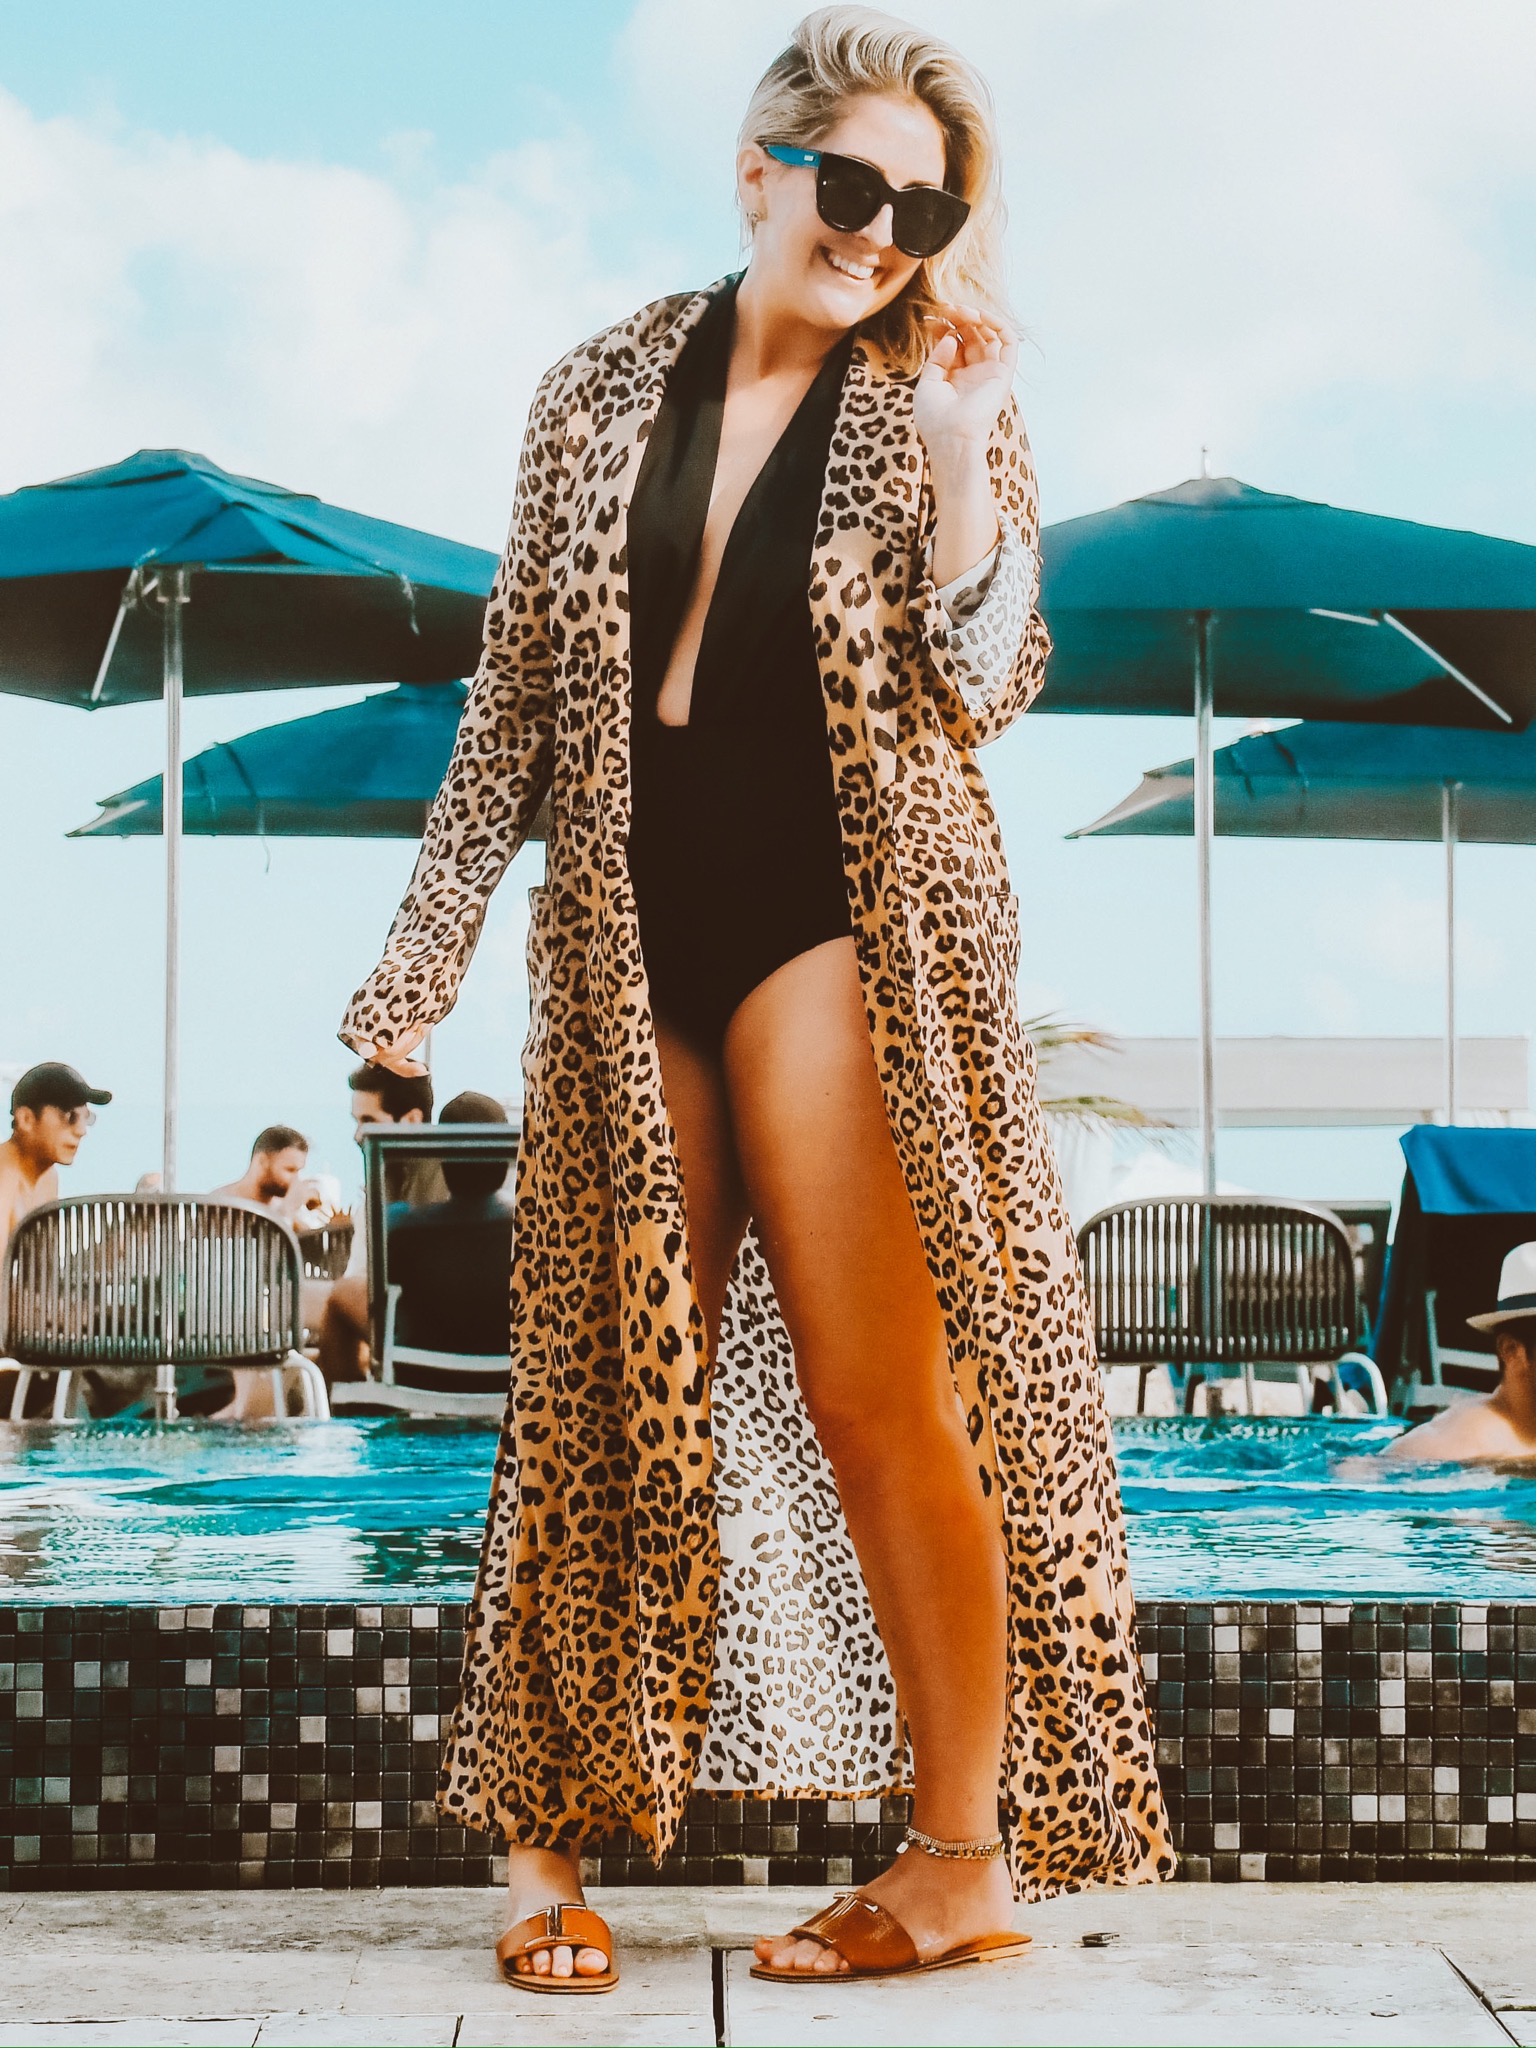 Fashion blogger KatWalkSF shares what she included in her Playa del Carmen 2020 Packing List, Amazon Swimsuit, Leopard Duster, KatWalkSF